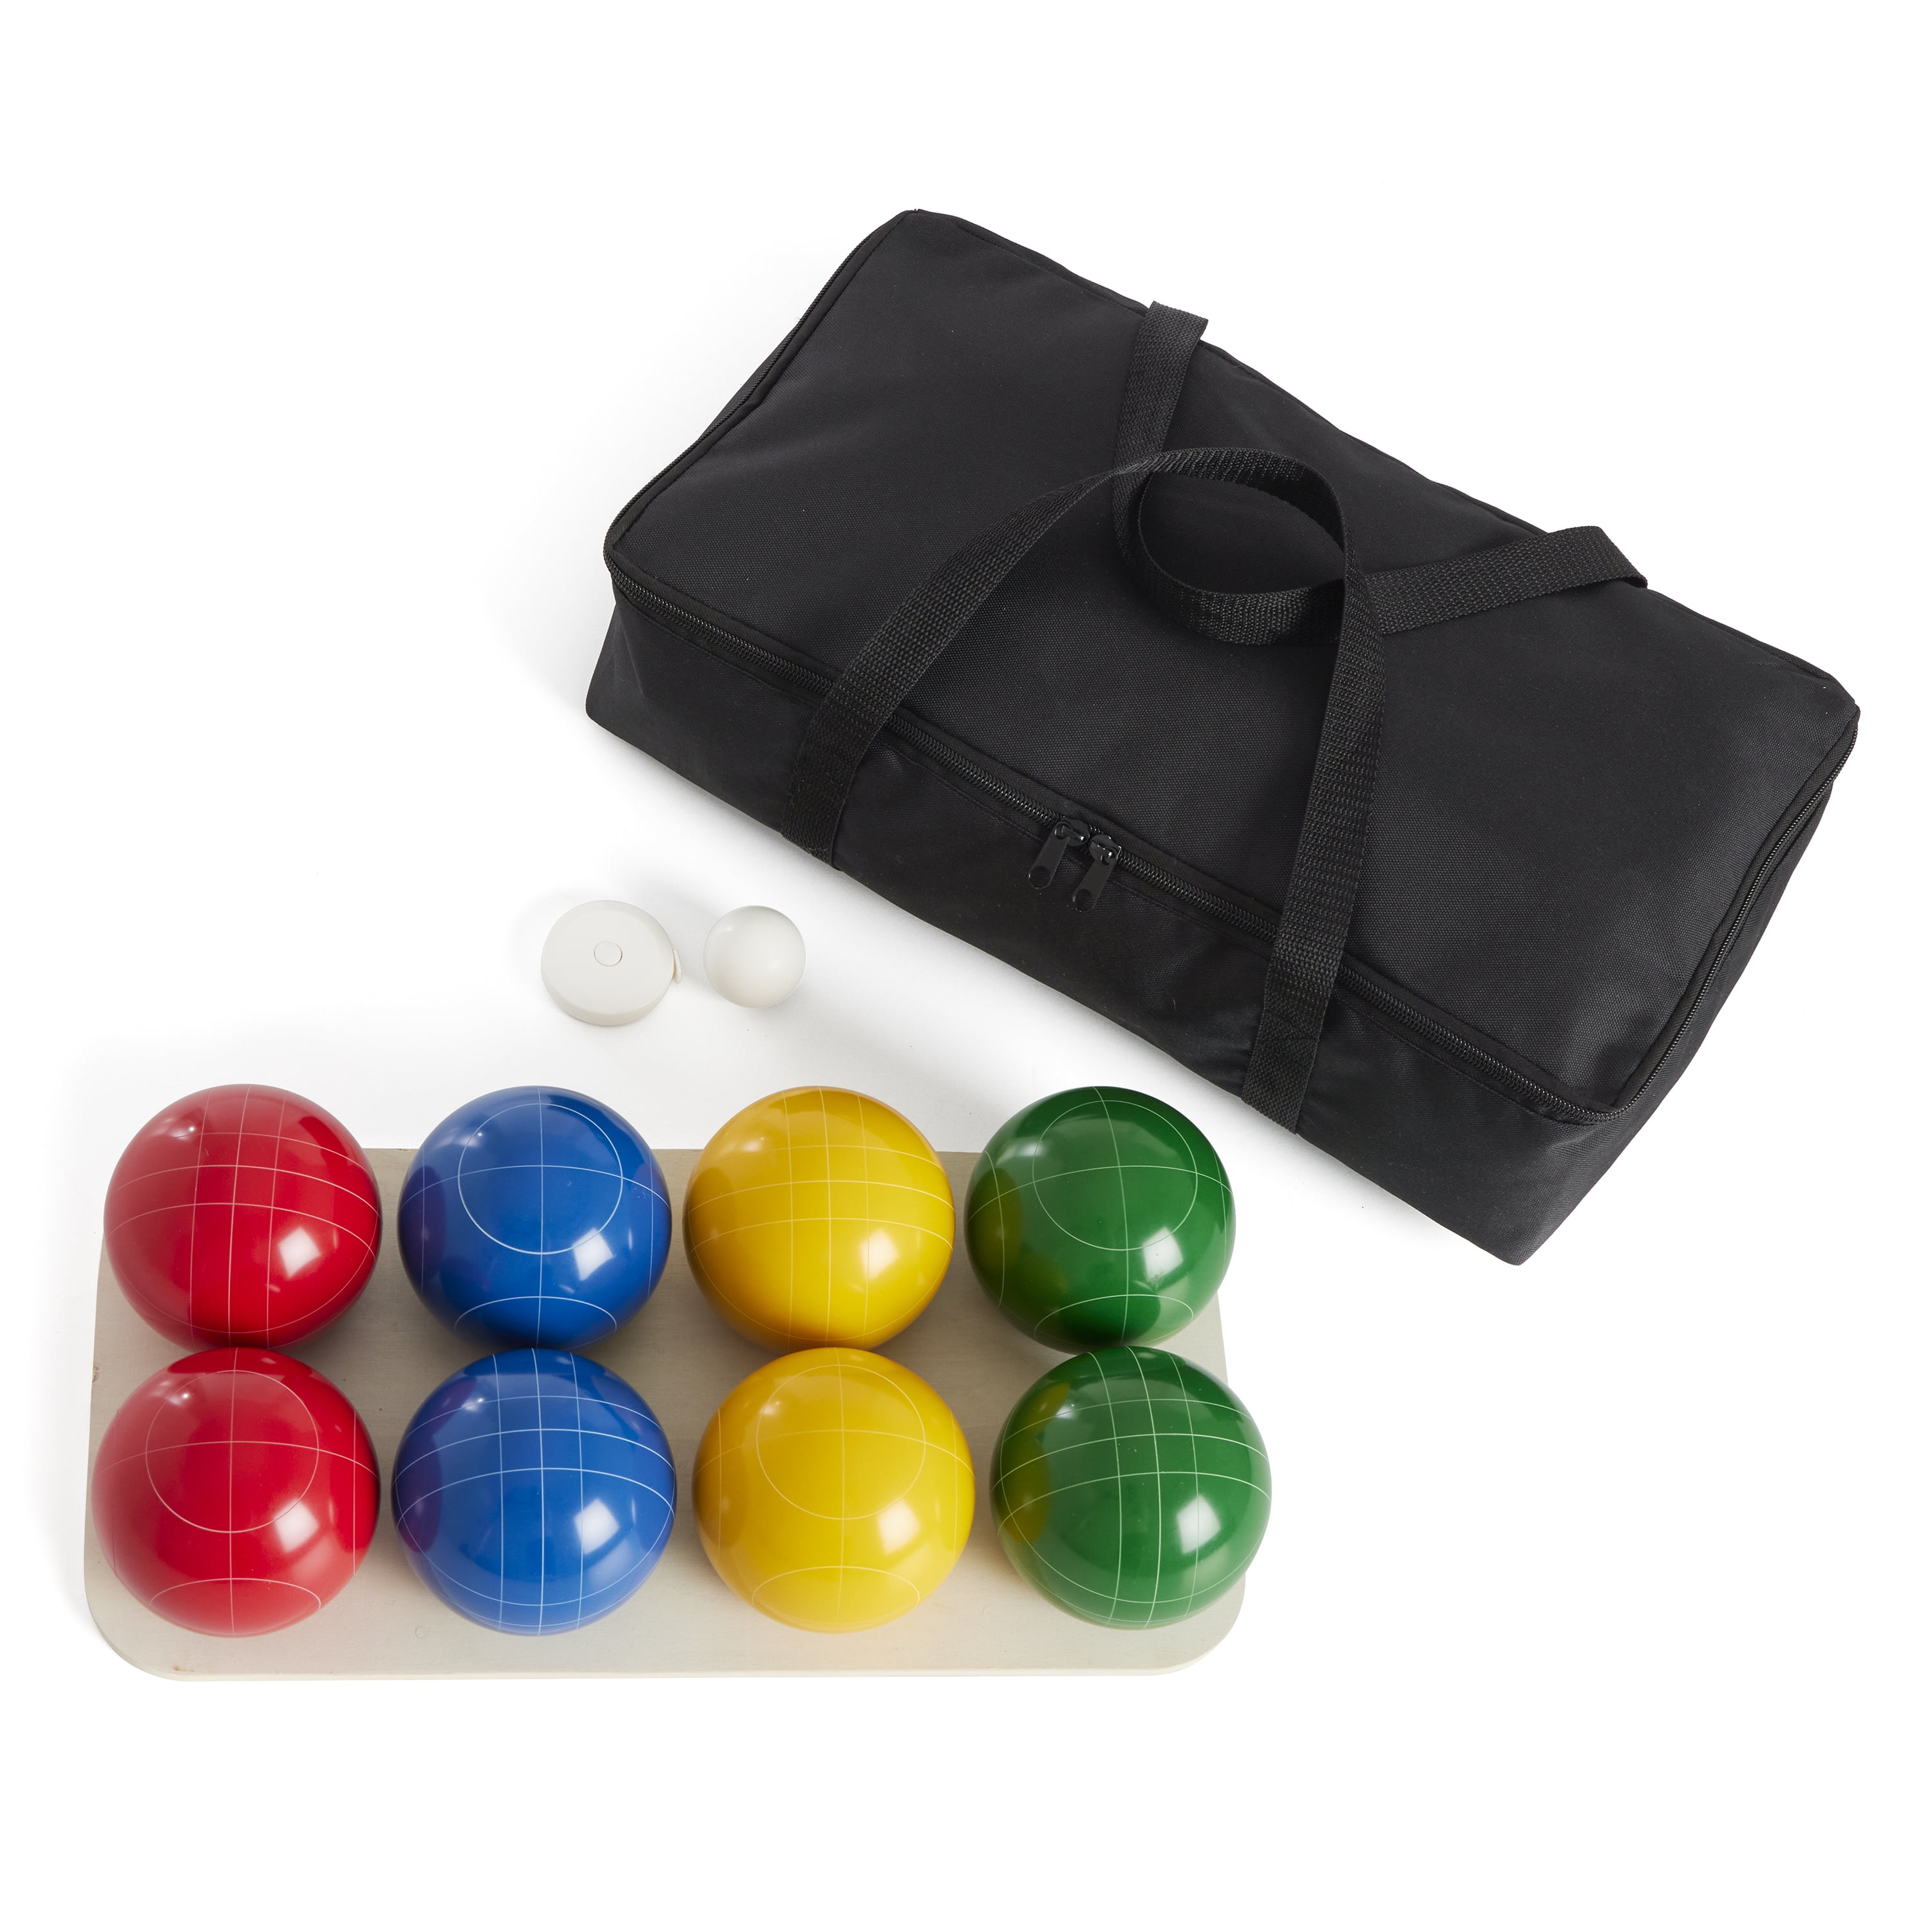 PALLINO TARGET BALL-EX LG GRASS PLAY SIZE-SOLID WOOD BOCCE PALLINO MADE IN ITALY 